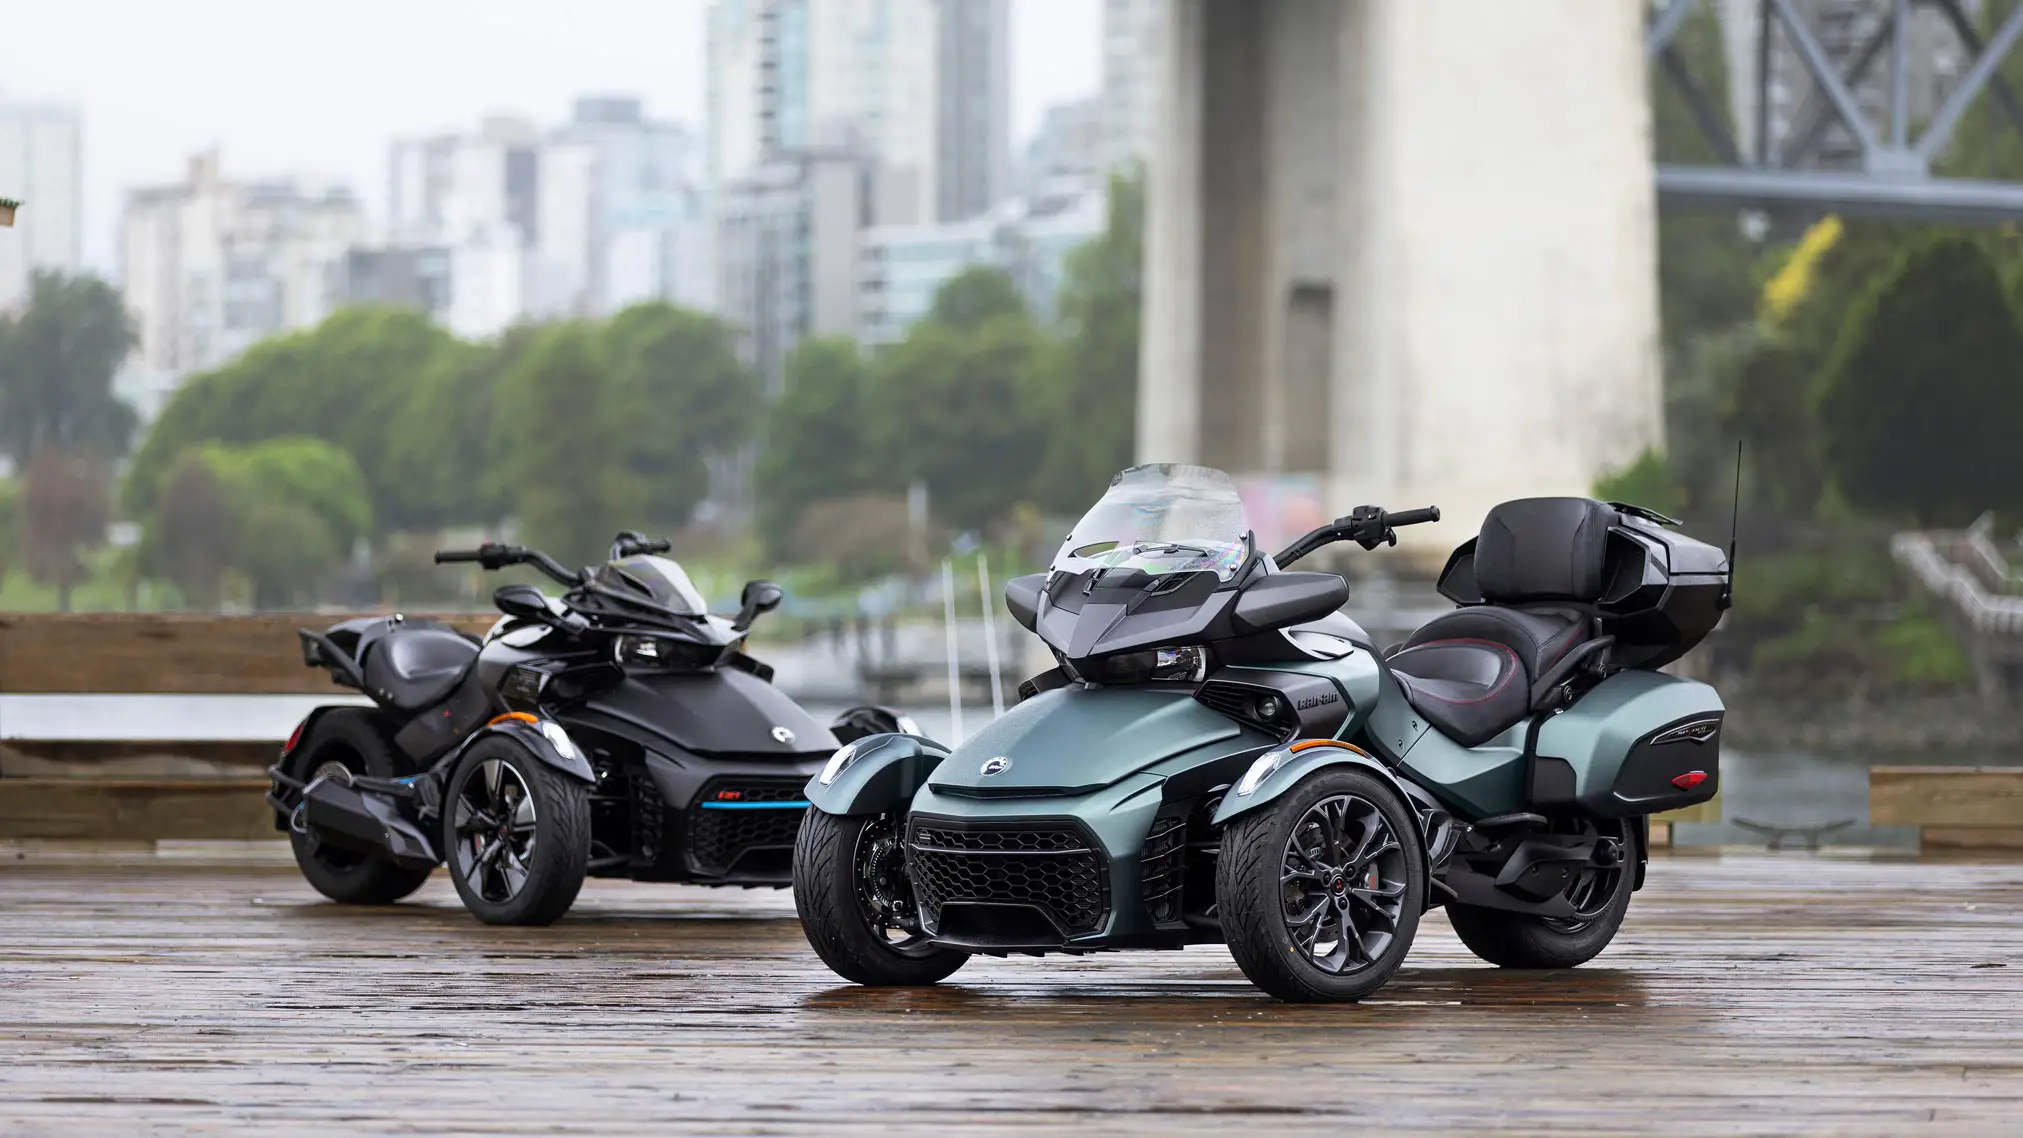 2023 Can-Am Spyder F3 - 3-wheel sport and touring motorcycle